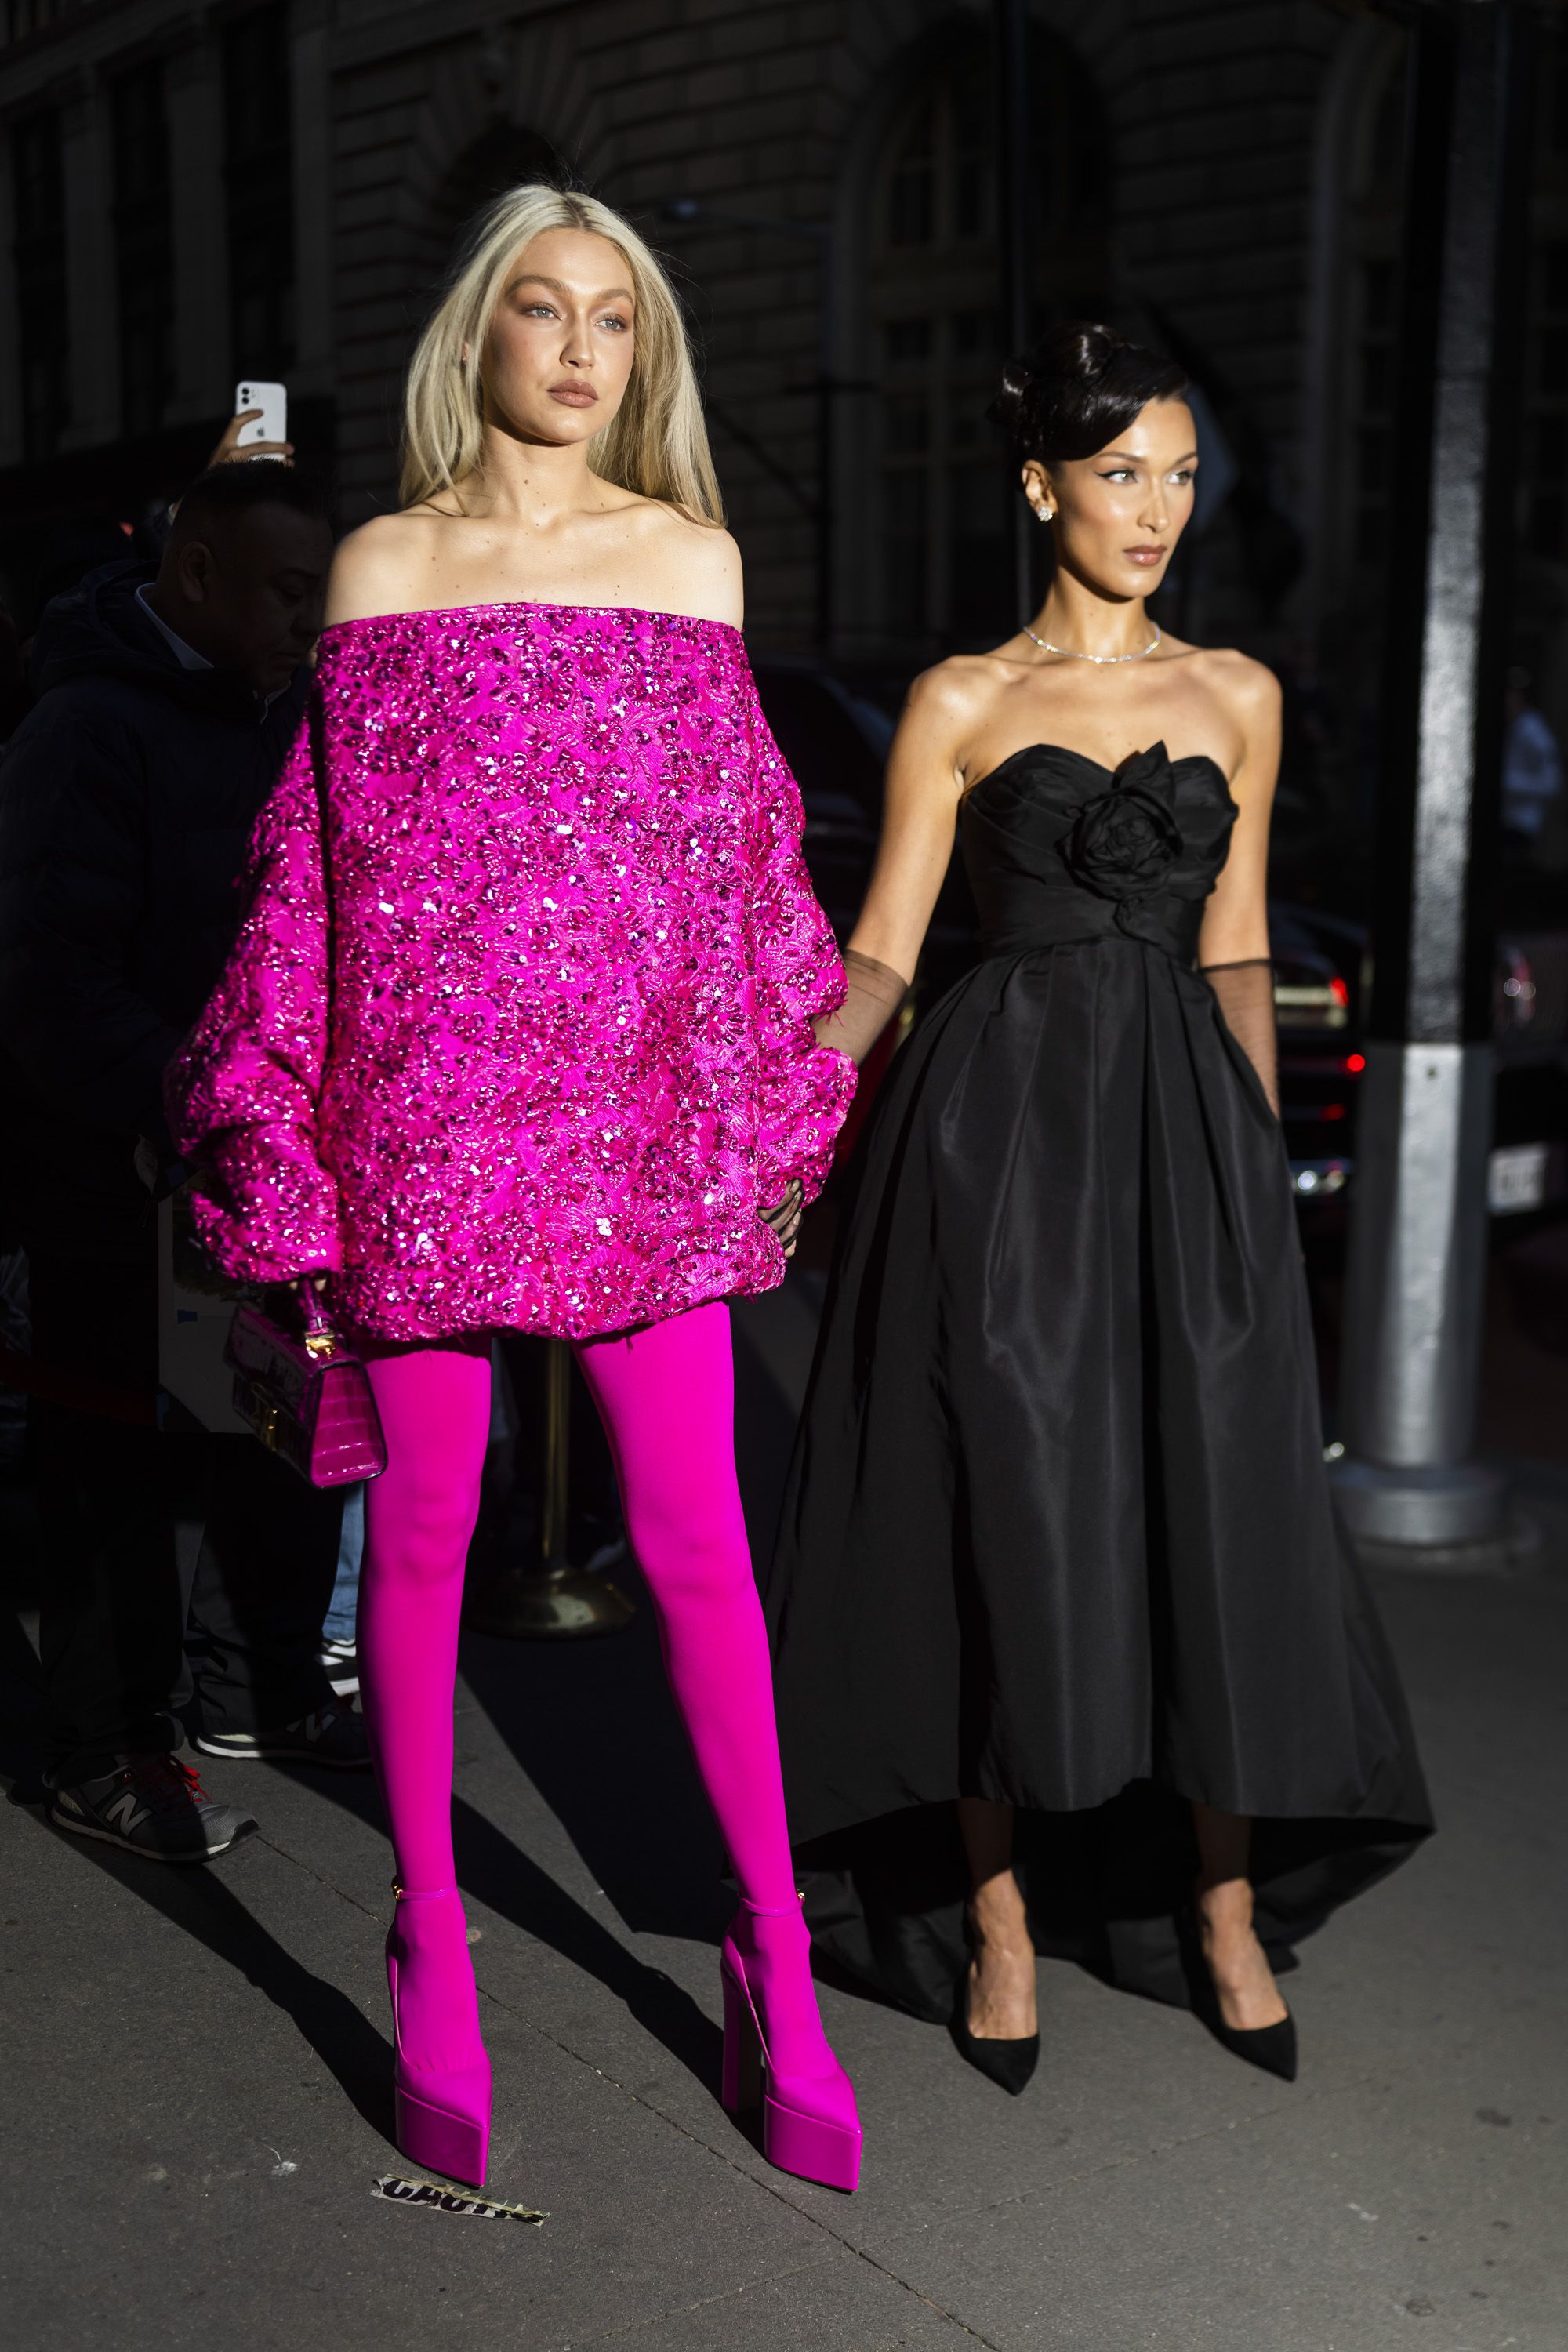 Bella and Gigi Hadid Twin on the Runway in Matching Dresses